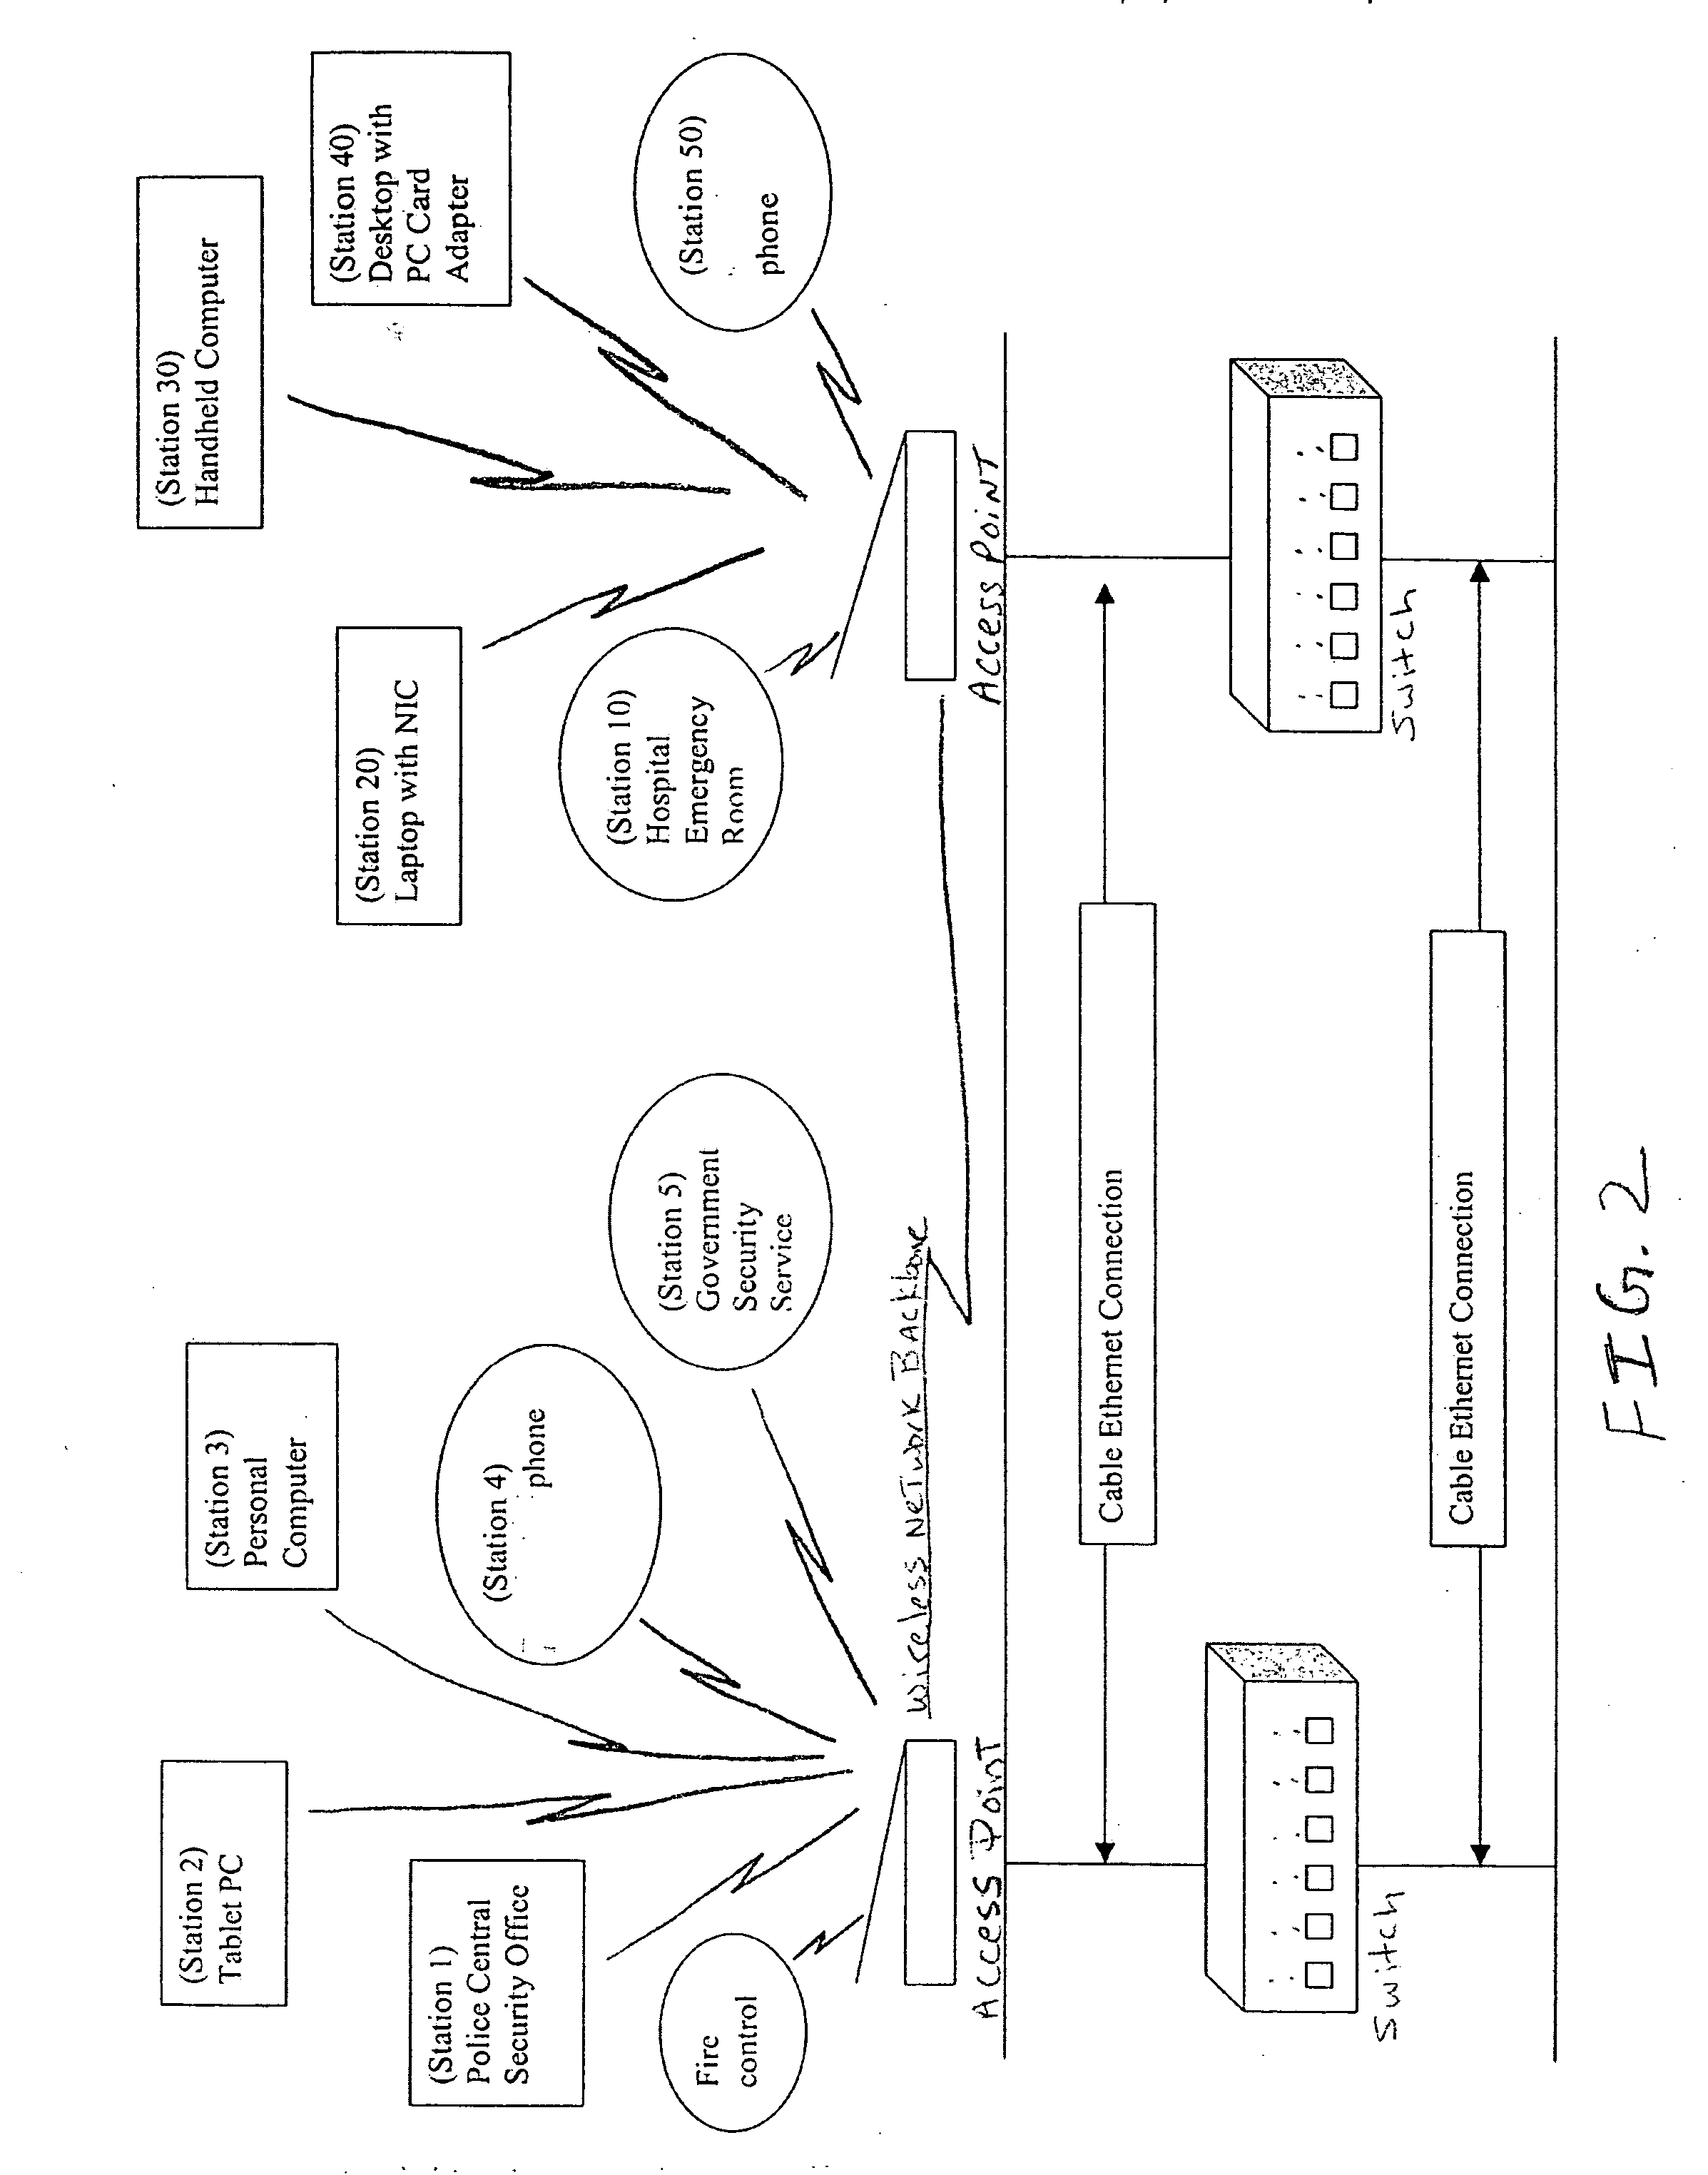 Methods and systems for providing priority access to 802.11 endpoints using DCF protocol